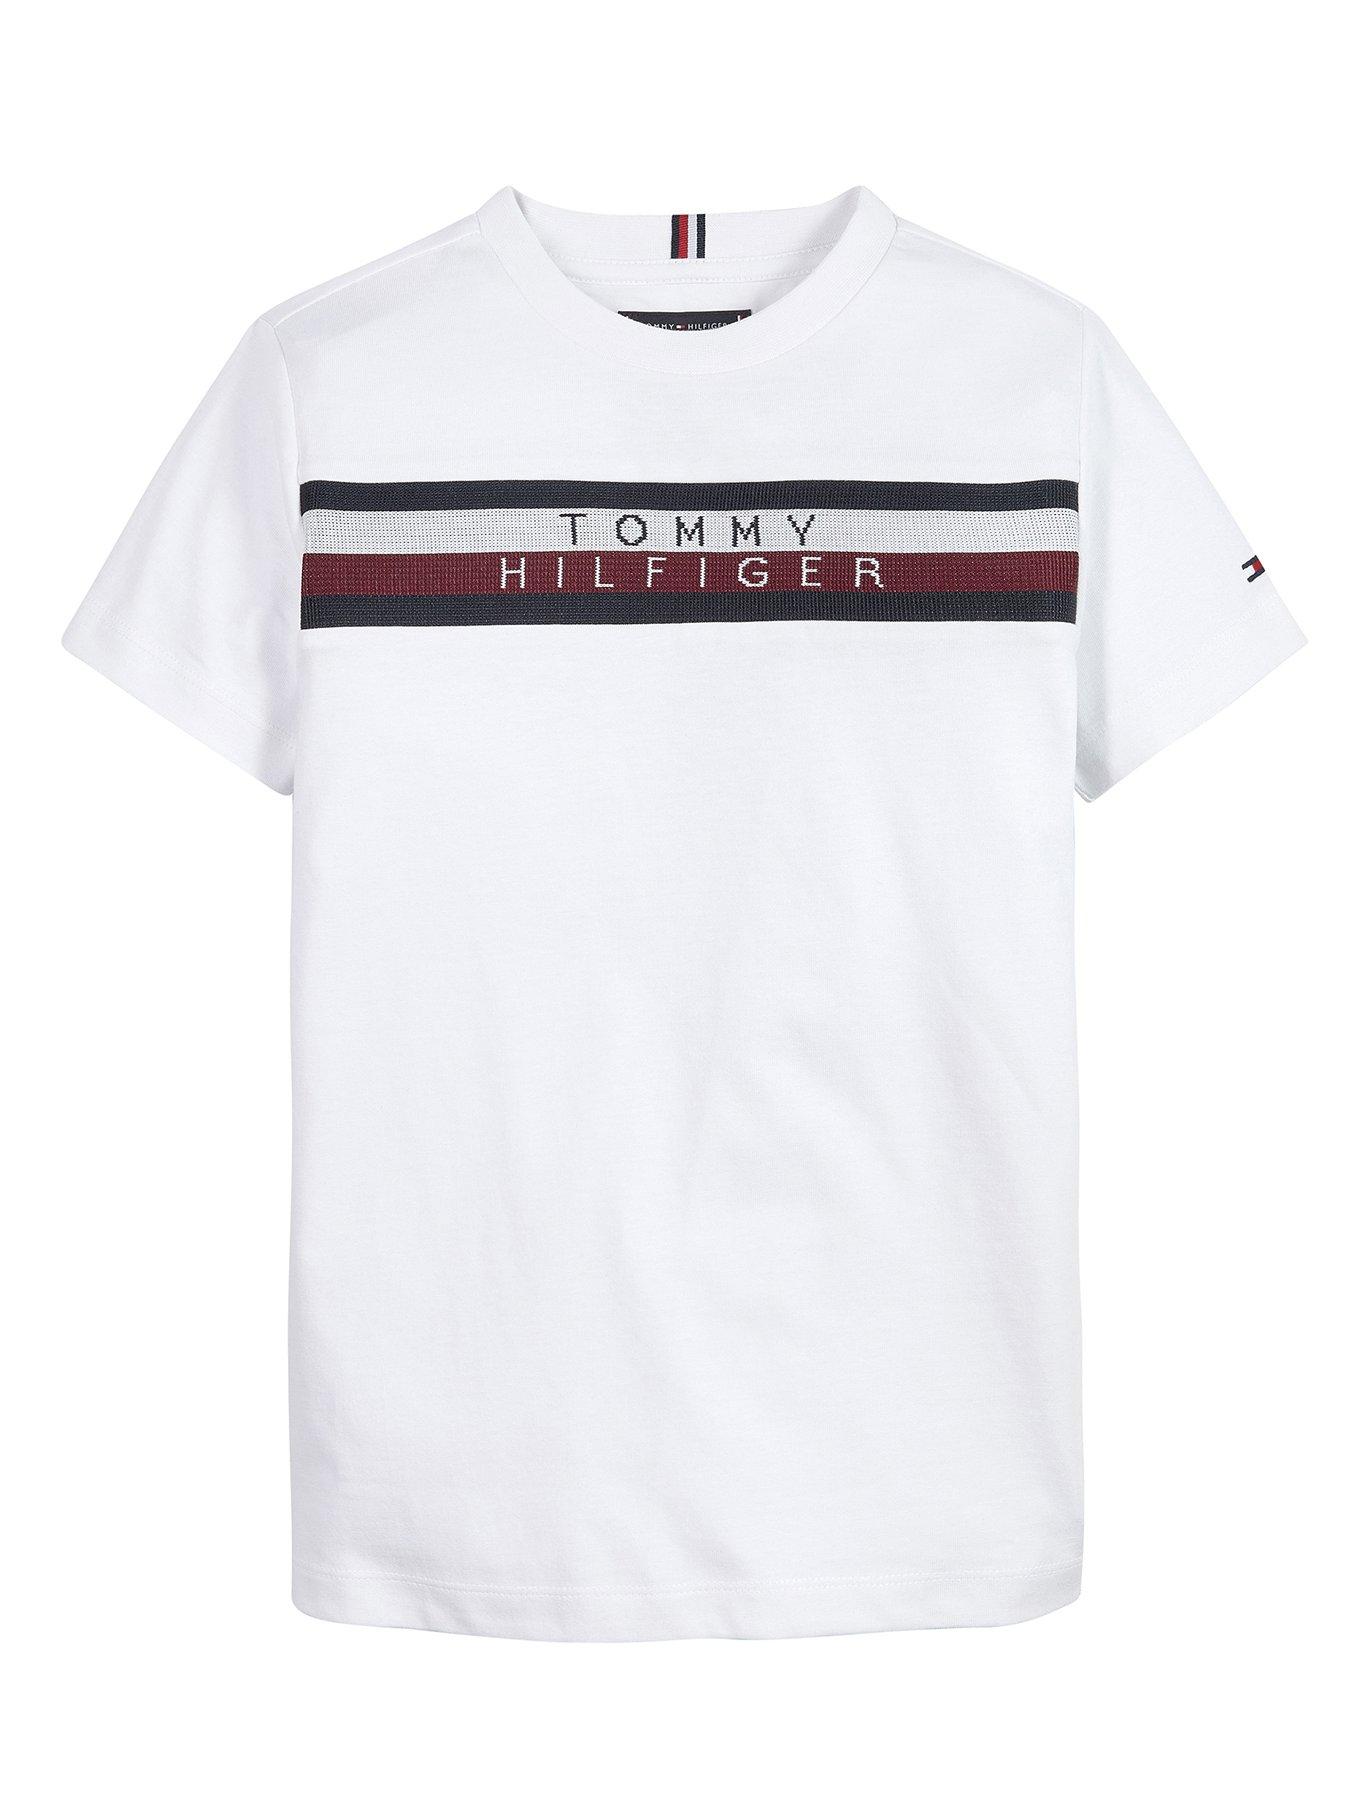 Tommy hilfiger | T-shirts & polos | Boys clothes | Child & baby